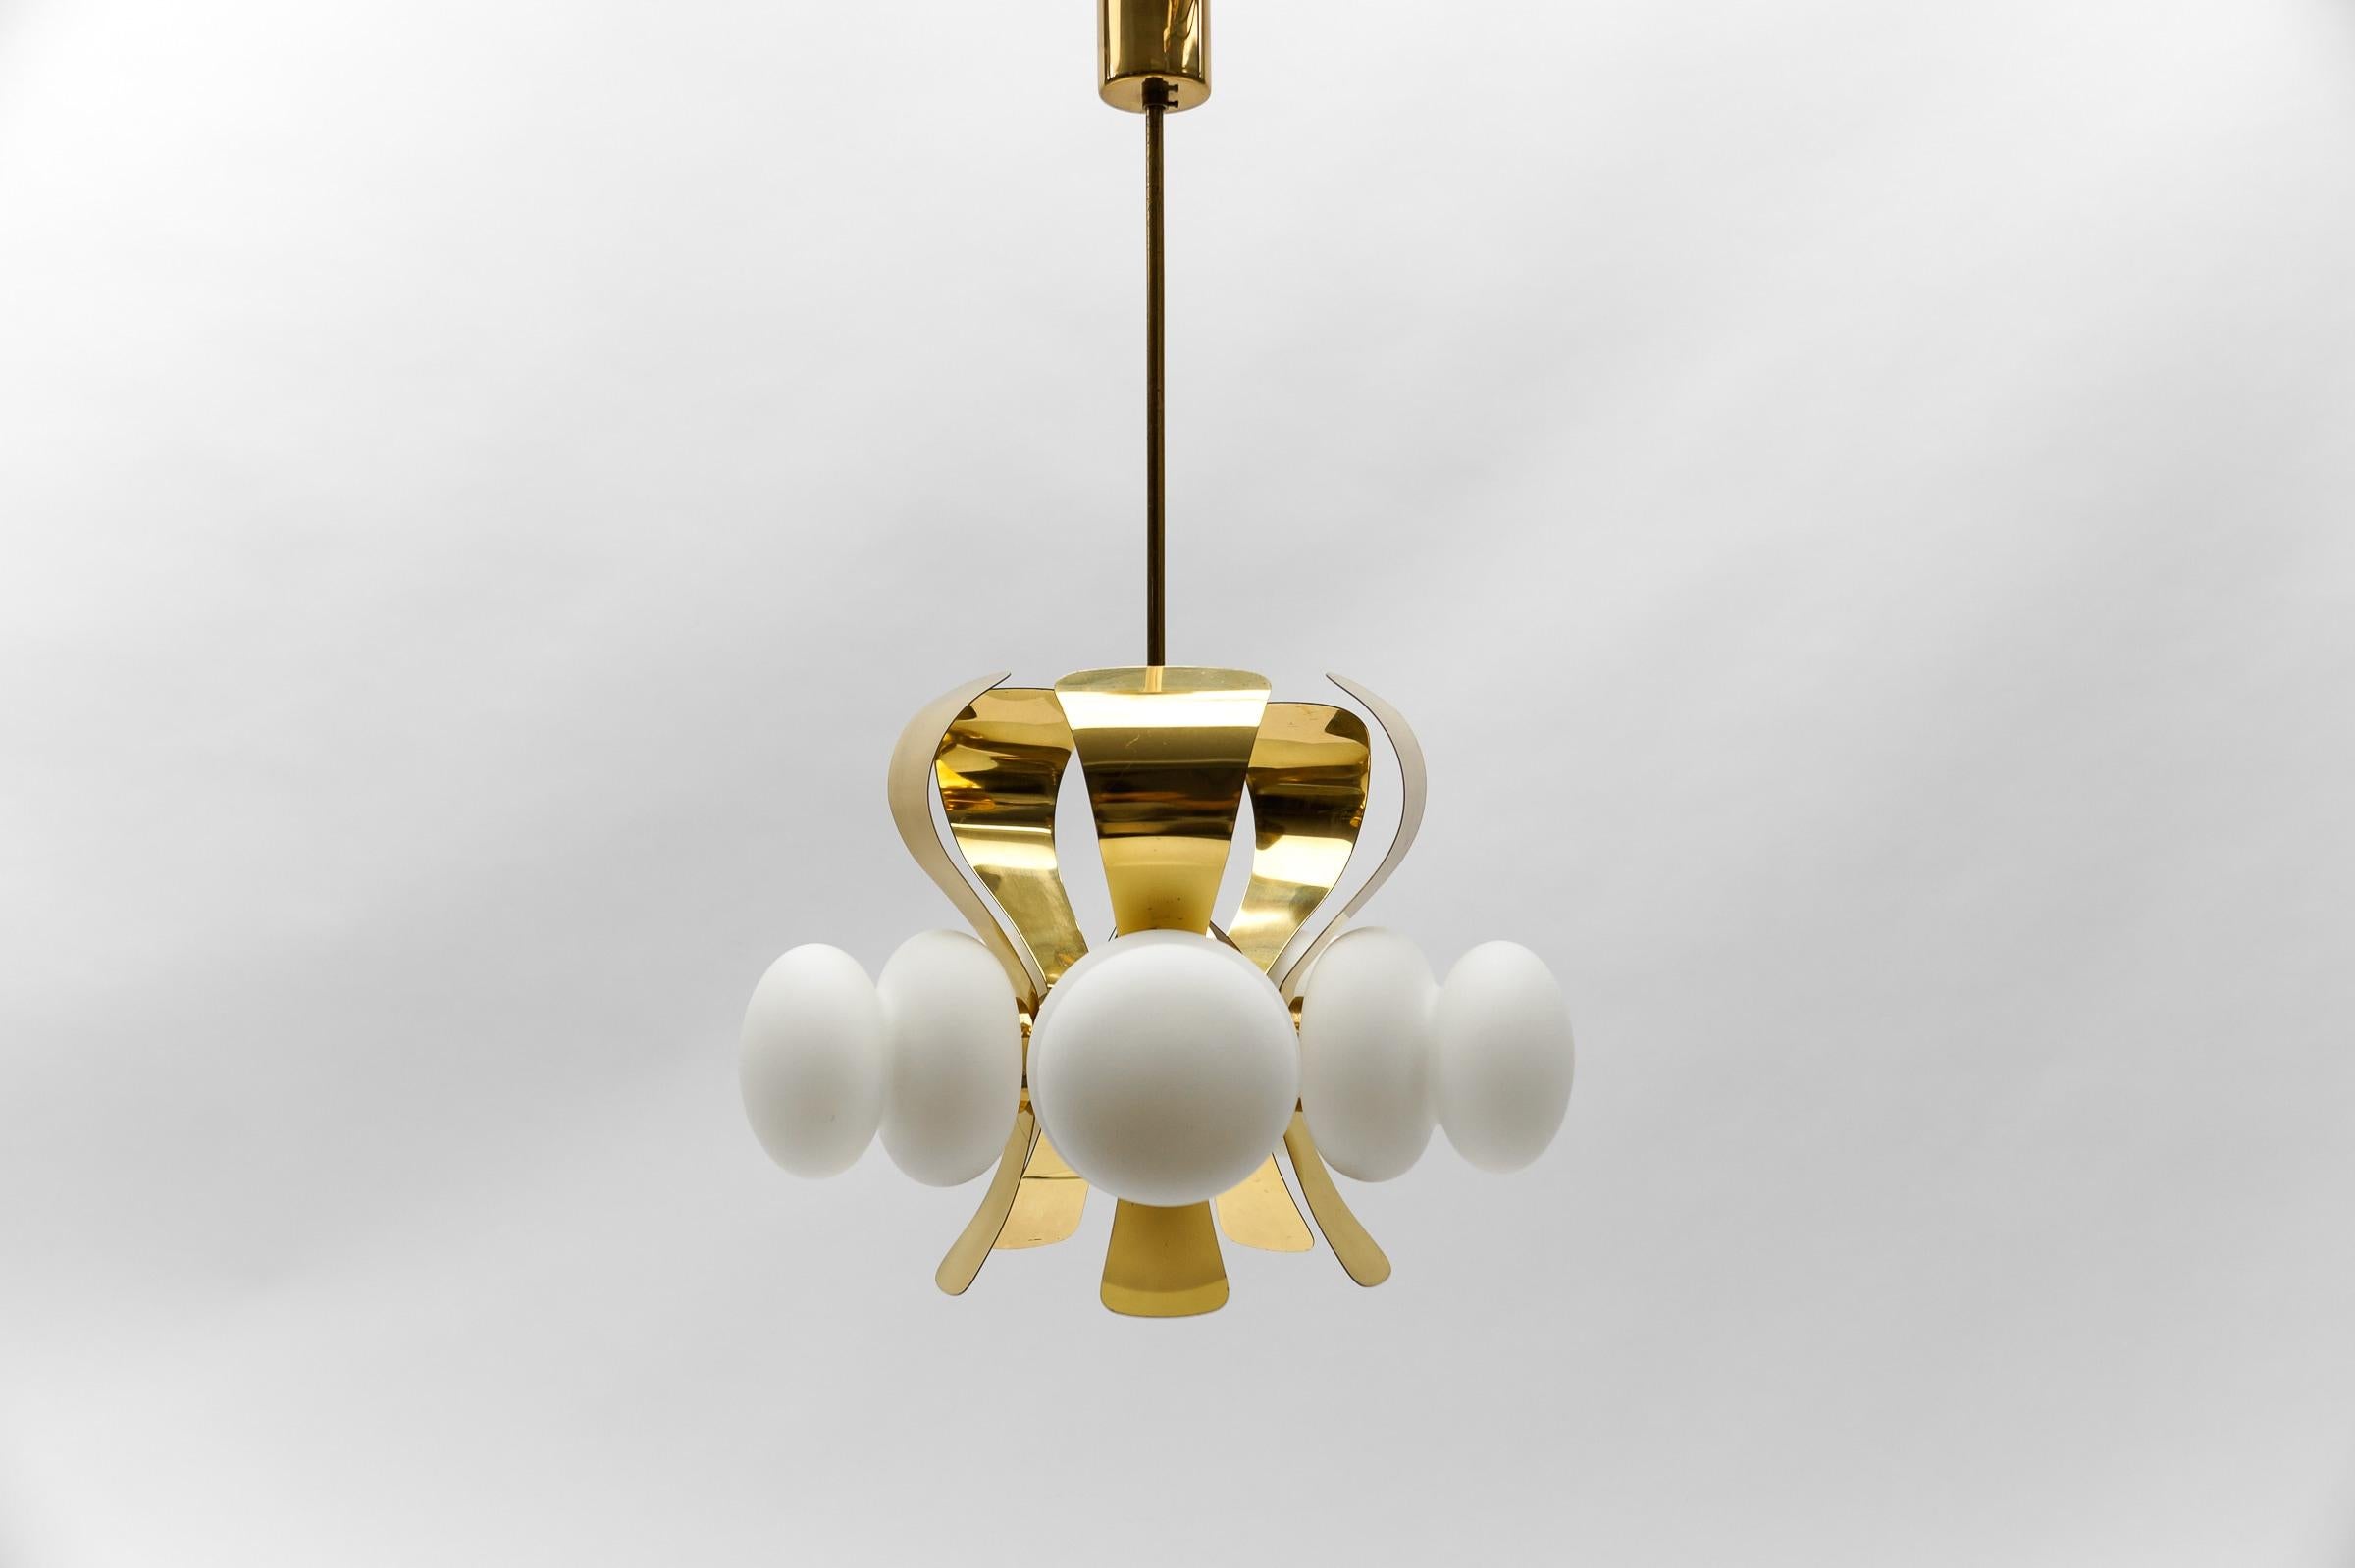 Large Mid-Century Modern Orbit or Sputnik Lamp with 12 Opaline Glass Balls

Diameter: 25.19 in (64 cm)
Height: 33.07 in (83 cm)

Executed in glass, metal and brass. The lamp needs 10 x E27 / E26 Edison screw fit bulb, is wired, in working condition